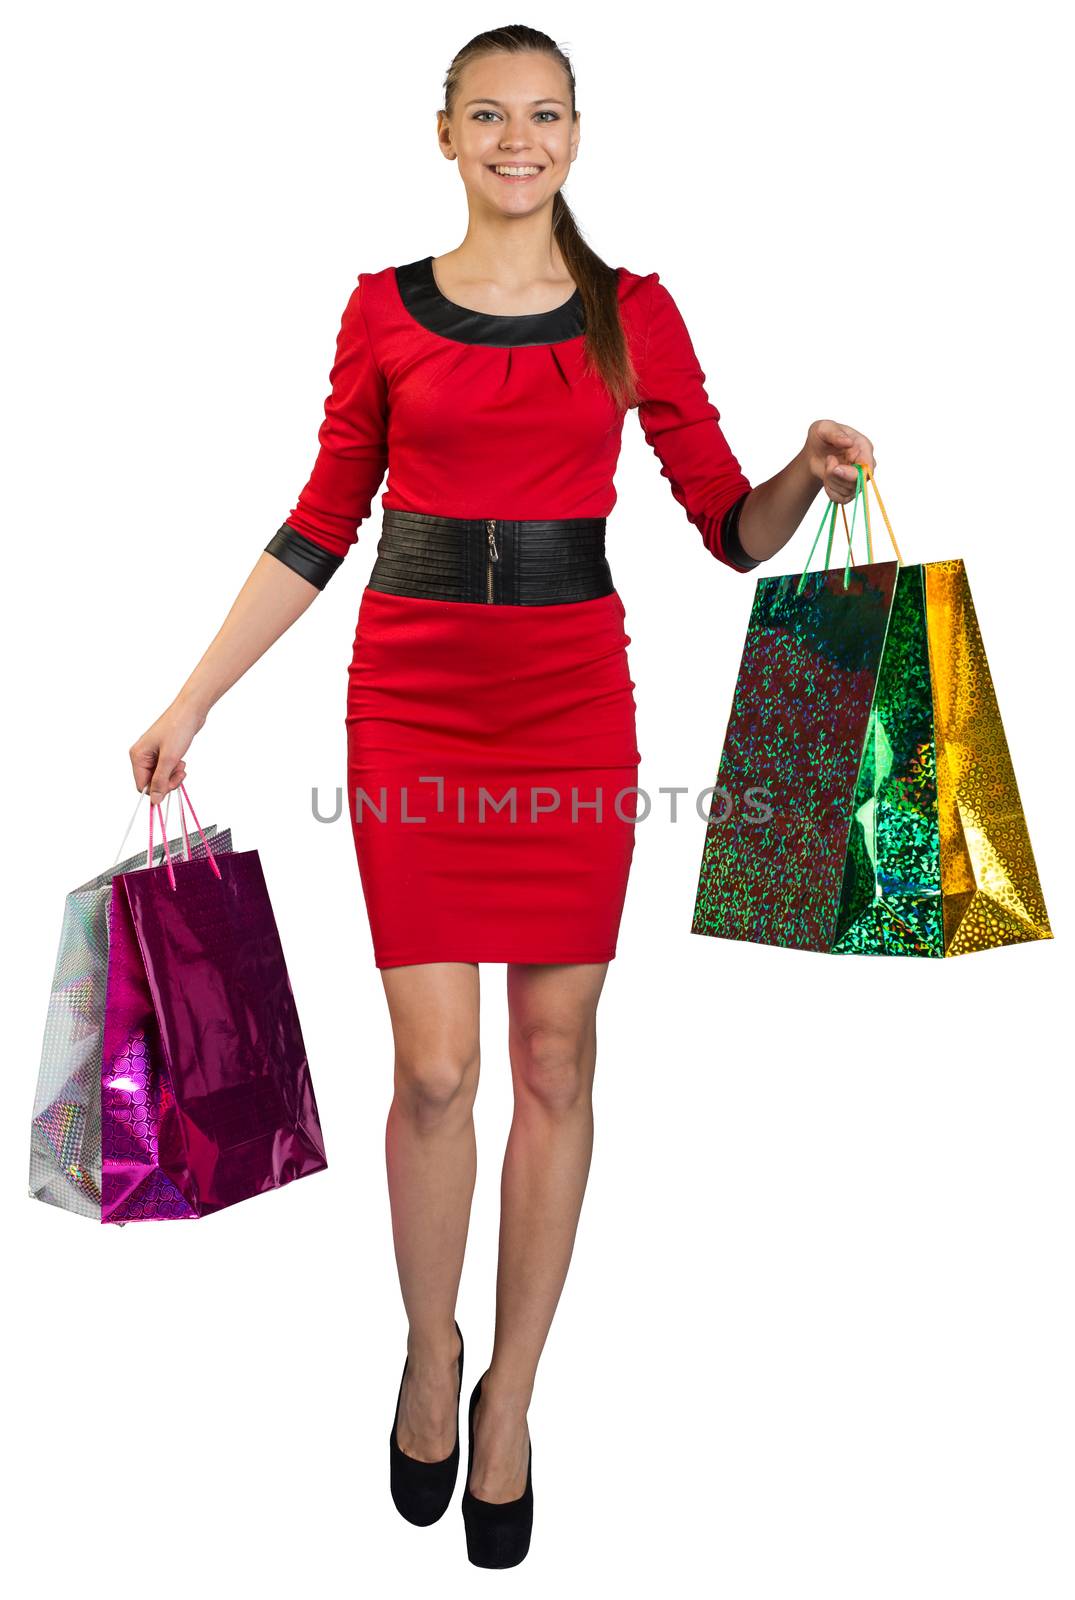 Walking young woman with teeth smile and right leg forward, handing colorful shopping bags up and looking at camera. Isolated background